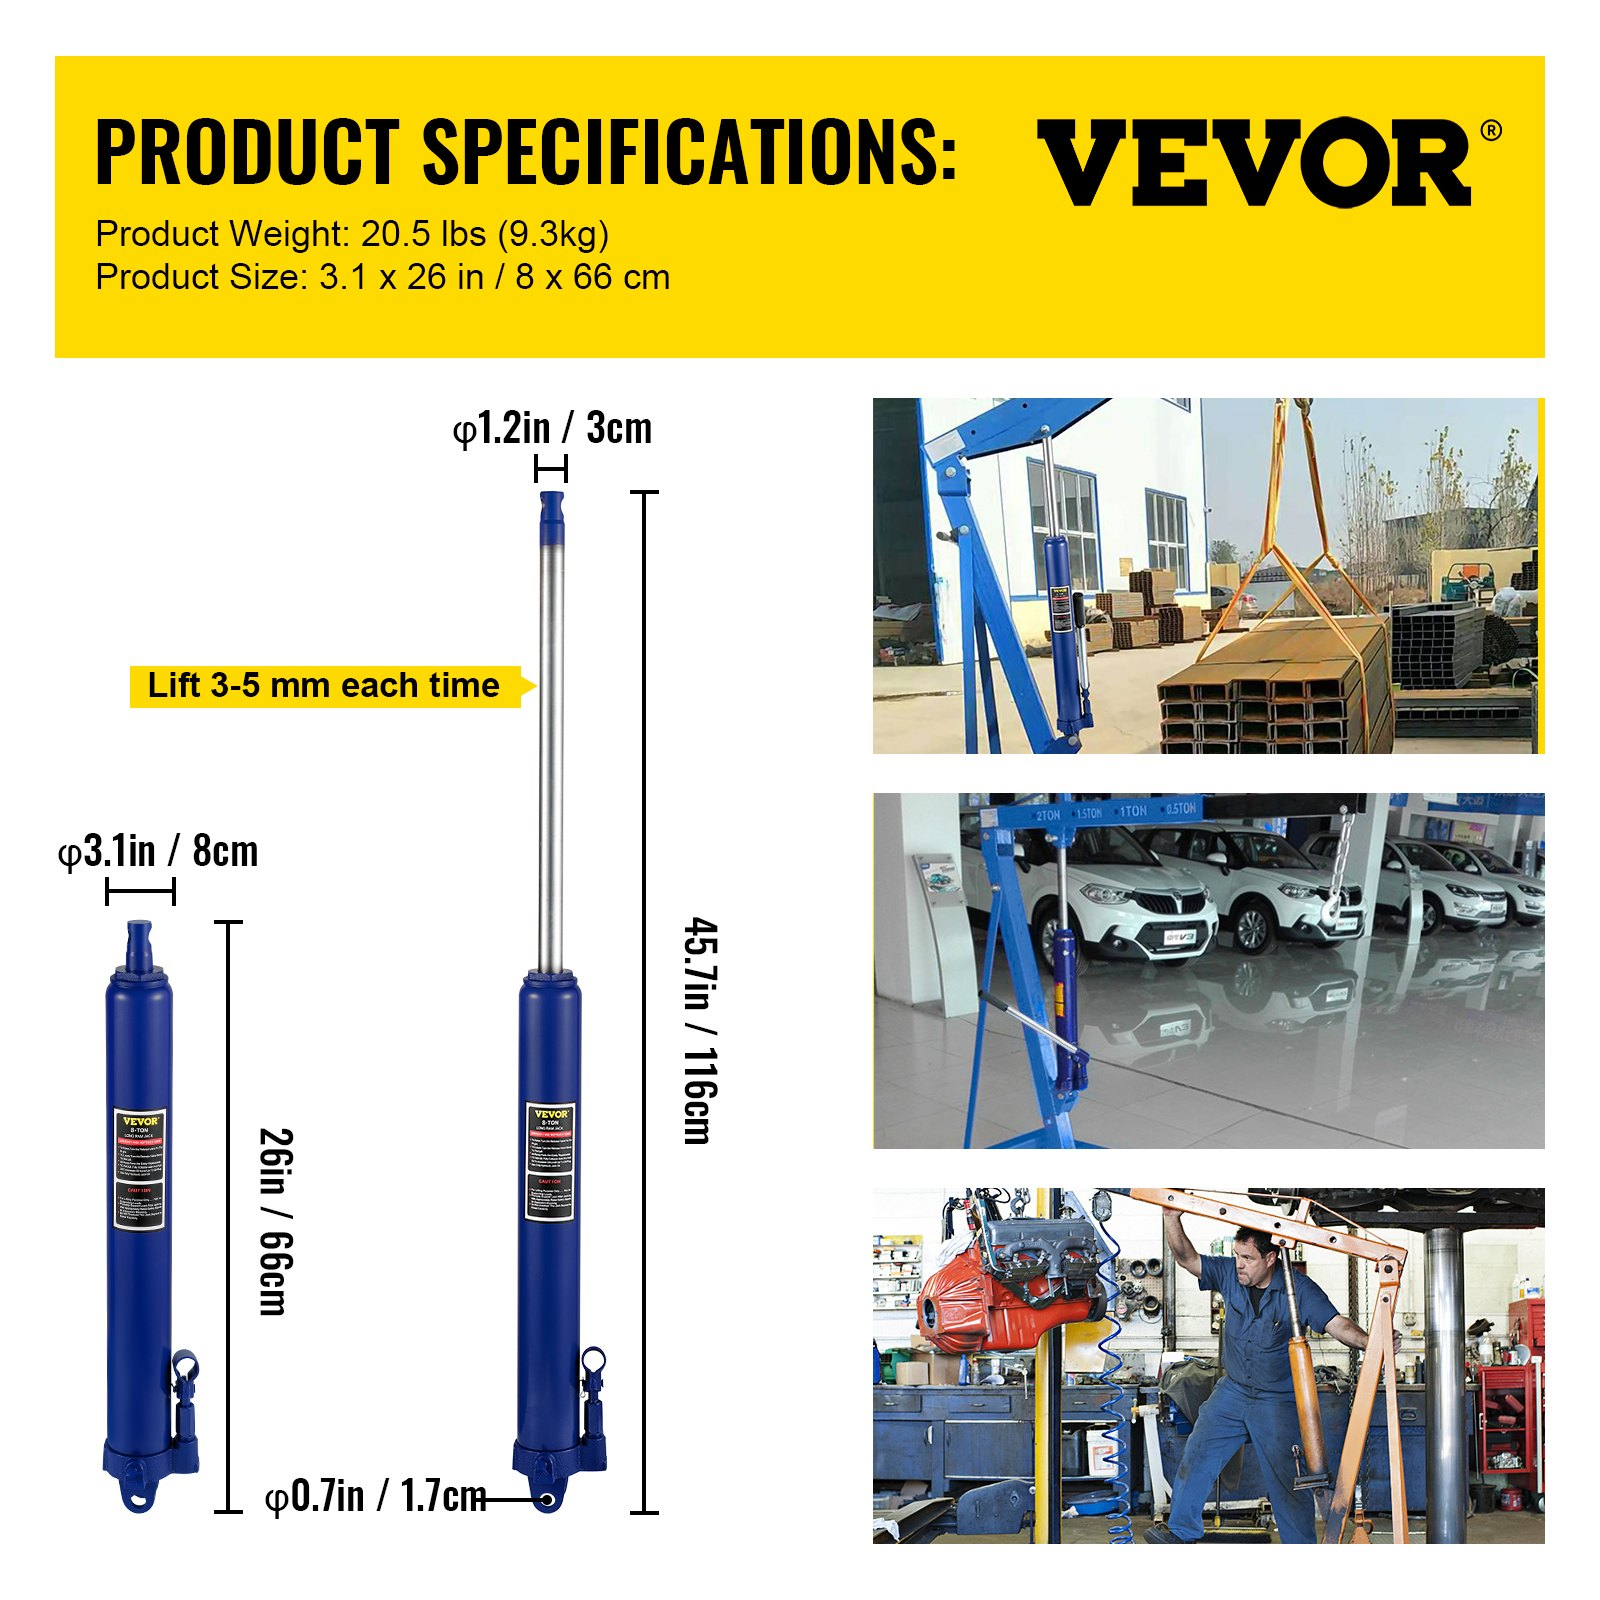 VEVOR Hydraulic Long Ram Jack, 8 Tons/17363 lbs Capacity, with Single Piston Pump and Clevis Base, Manual Cherry Picker w/Handle, for Garage/Shop Cranes, Engine Lift Hoist, Blue, Goodies N Stuff